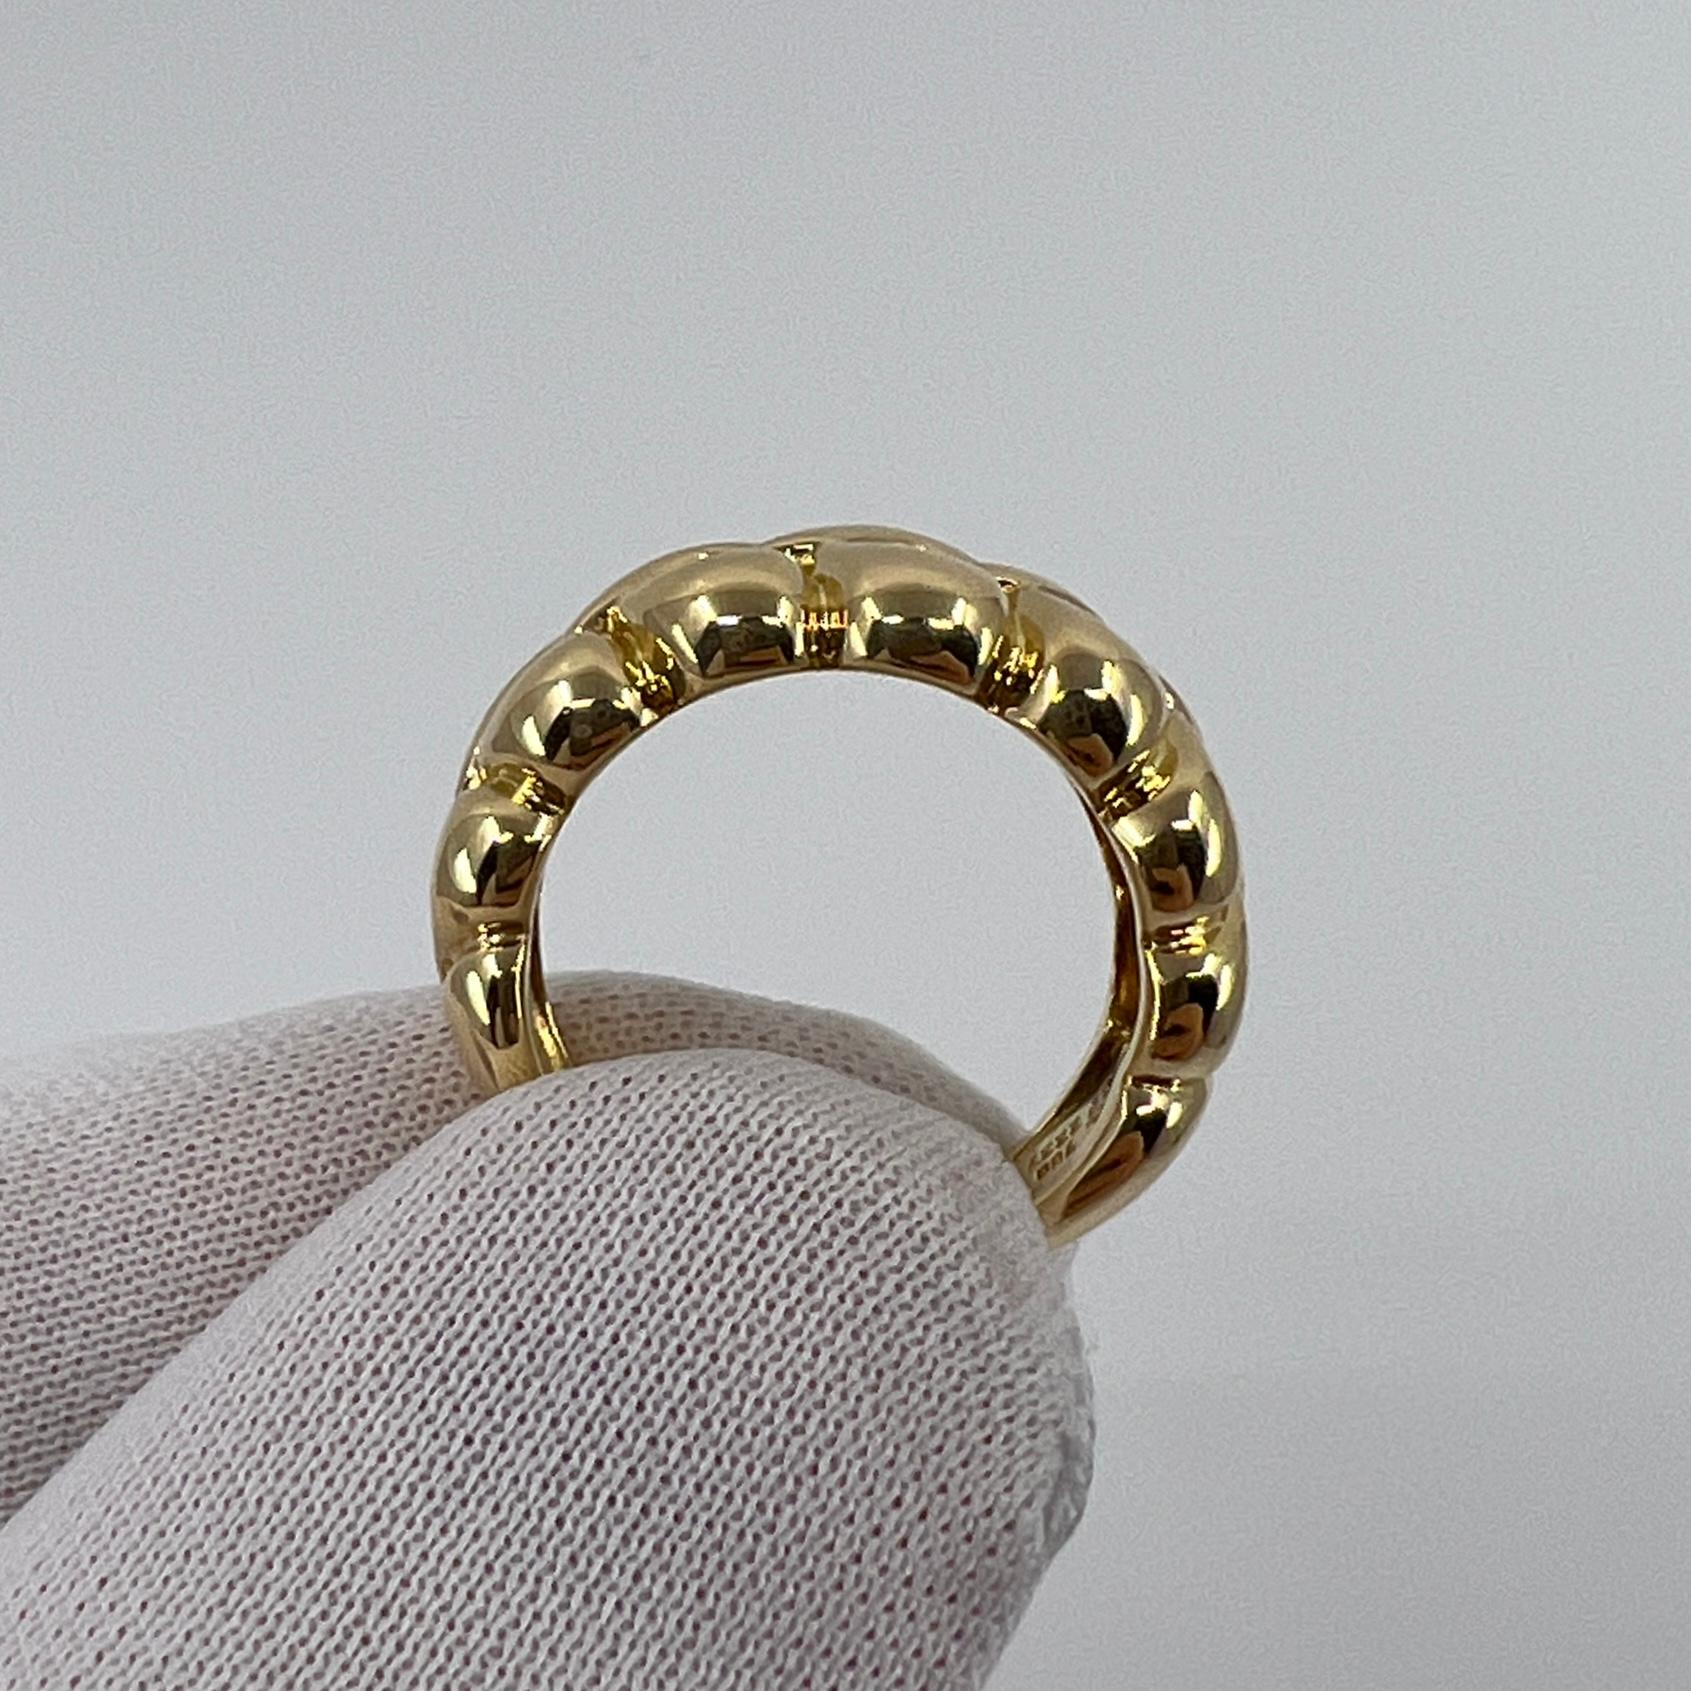 Rare Vintage Van Cleef & Arpels 18k Yellow Gold Open Heart Band Ring with Box 3